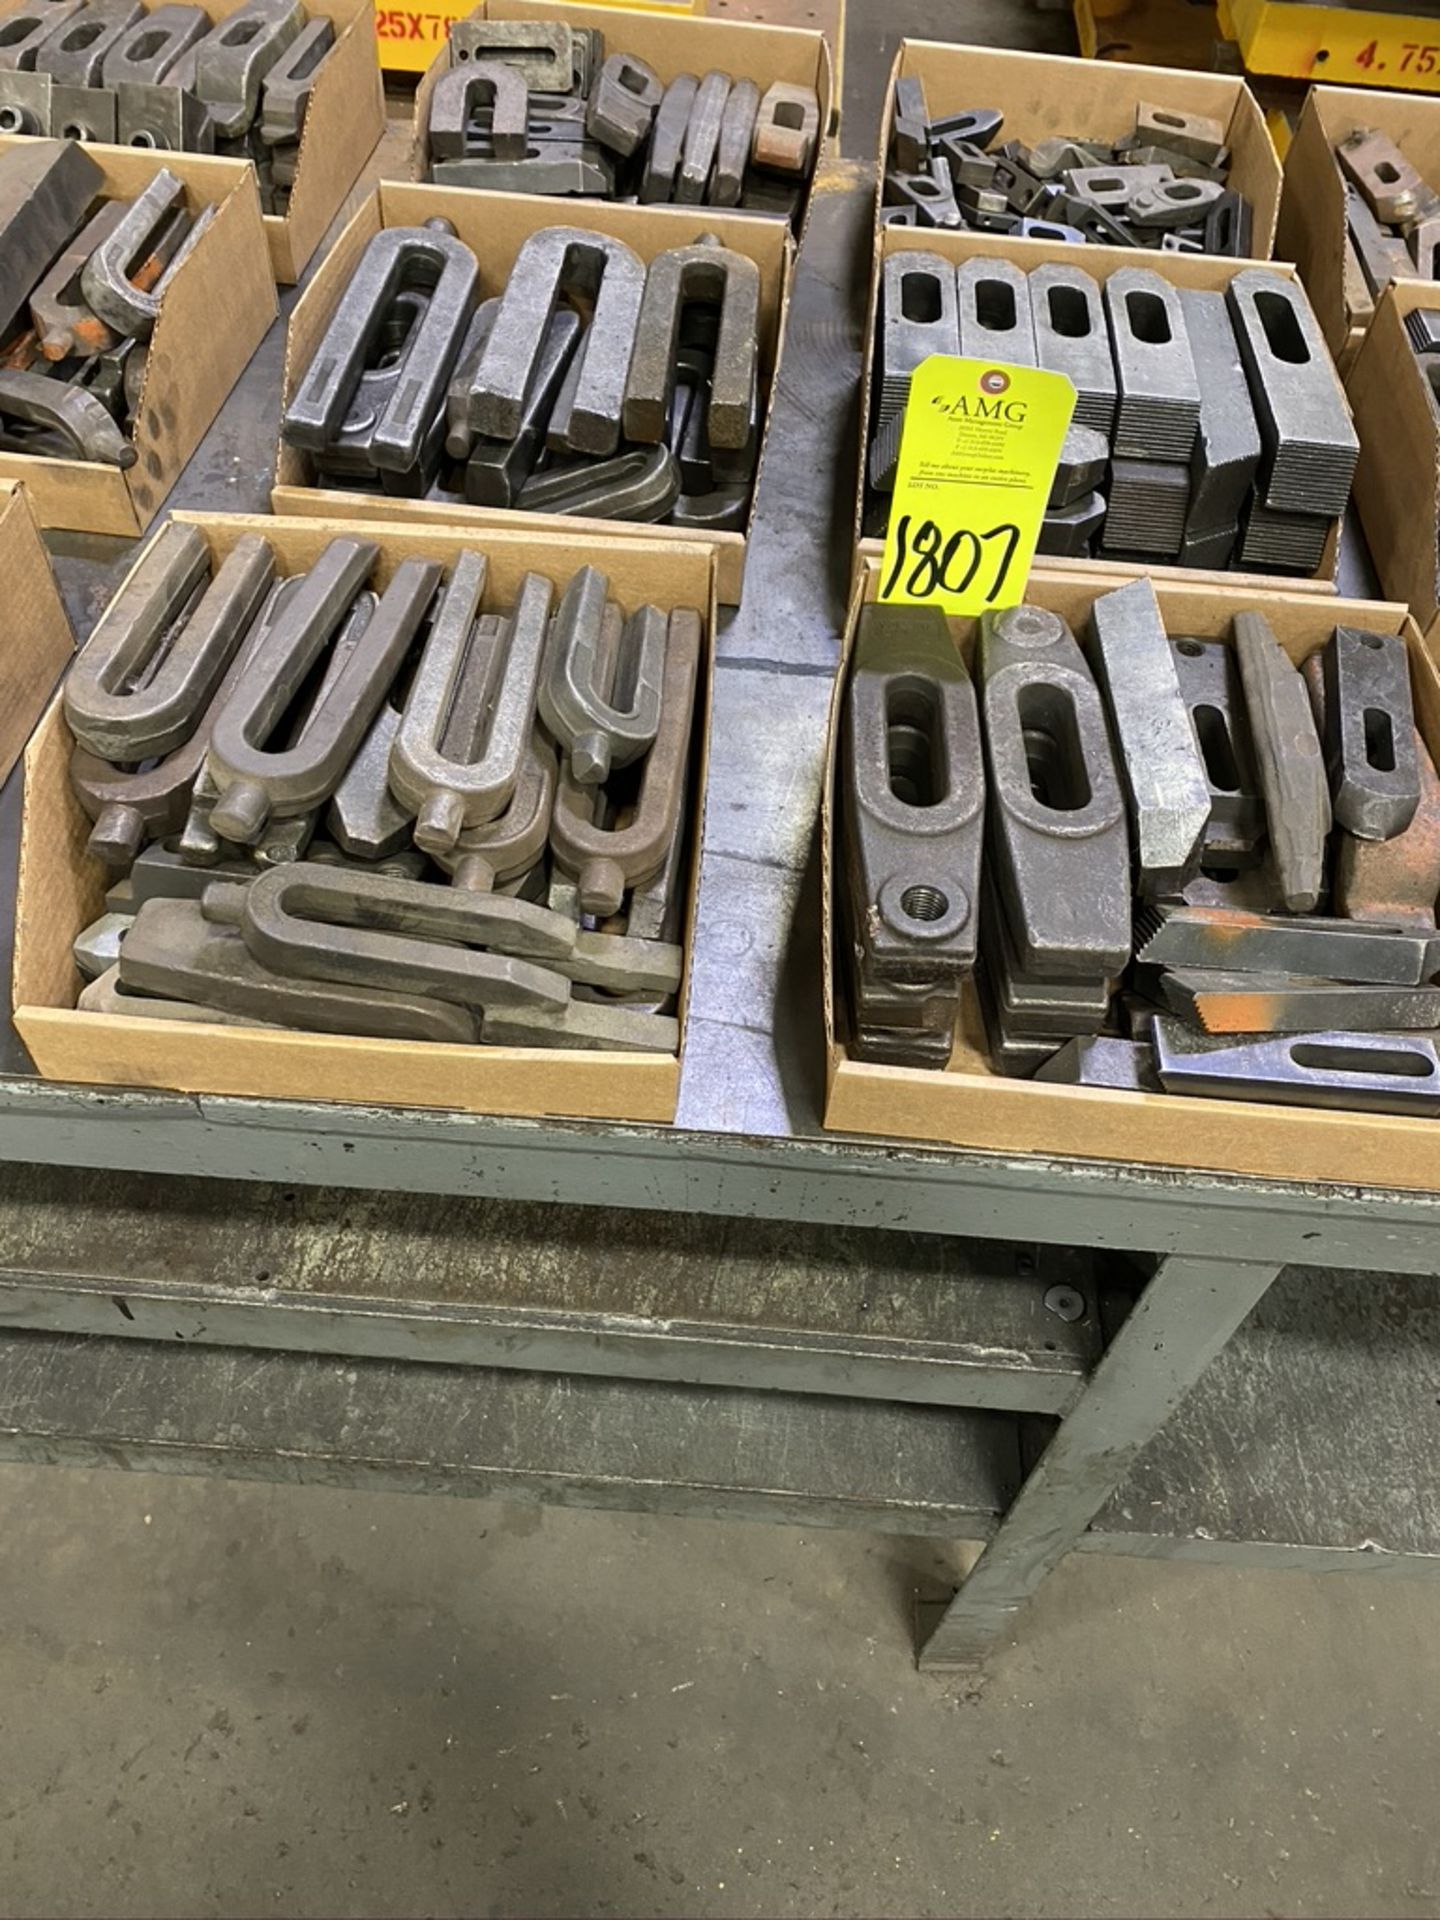 Lot-Various Hold Down Tooling in (9) Boxes, (D-14), (Yellow Tag) - Image 2 of 2